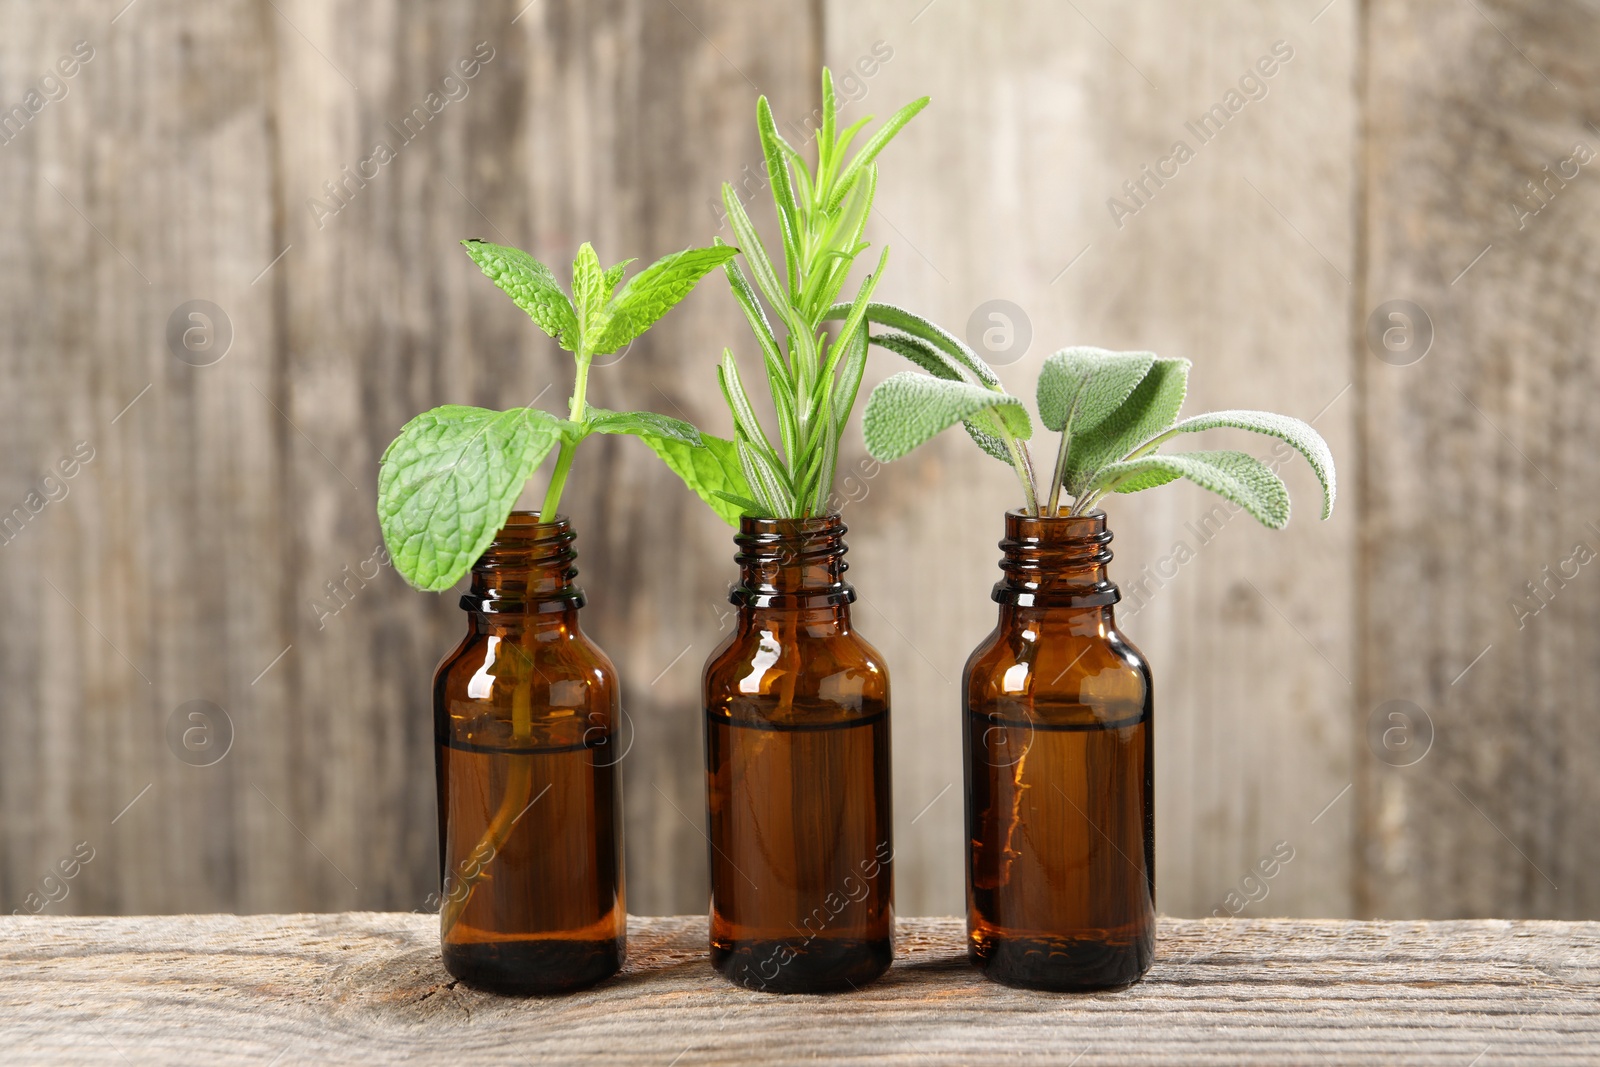 Photo of Bottles with essential oils and herbs on wooden table